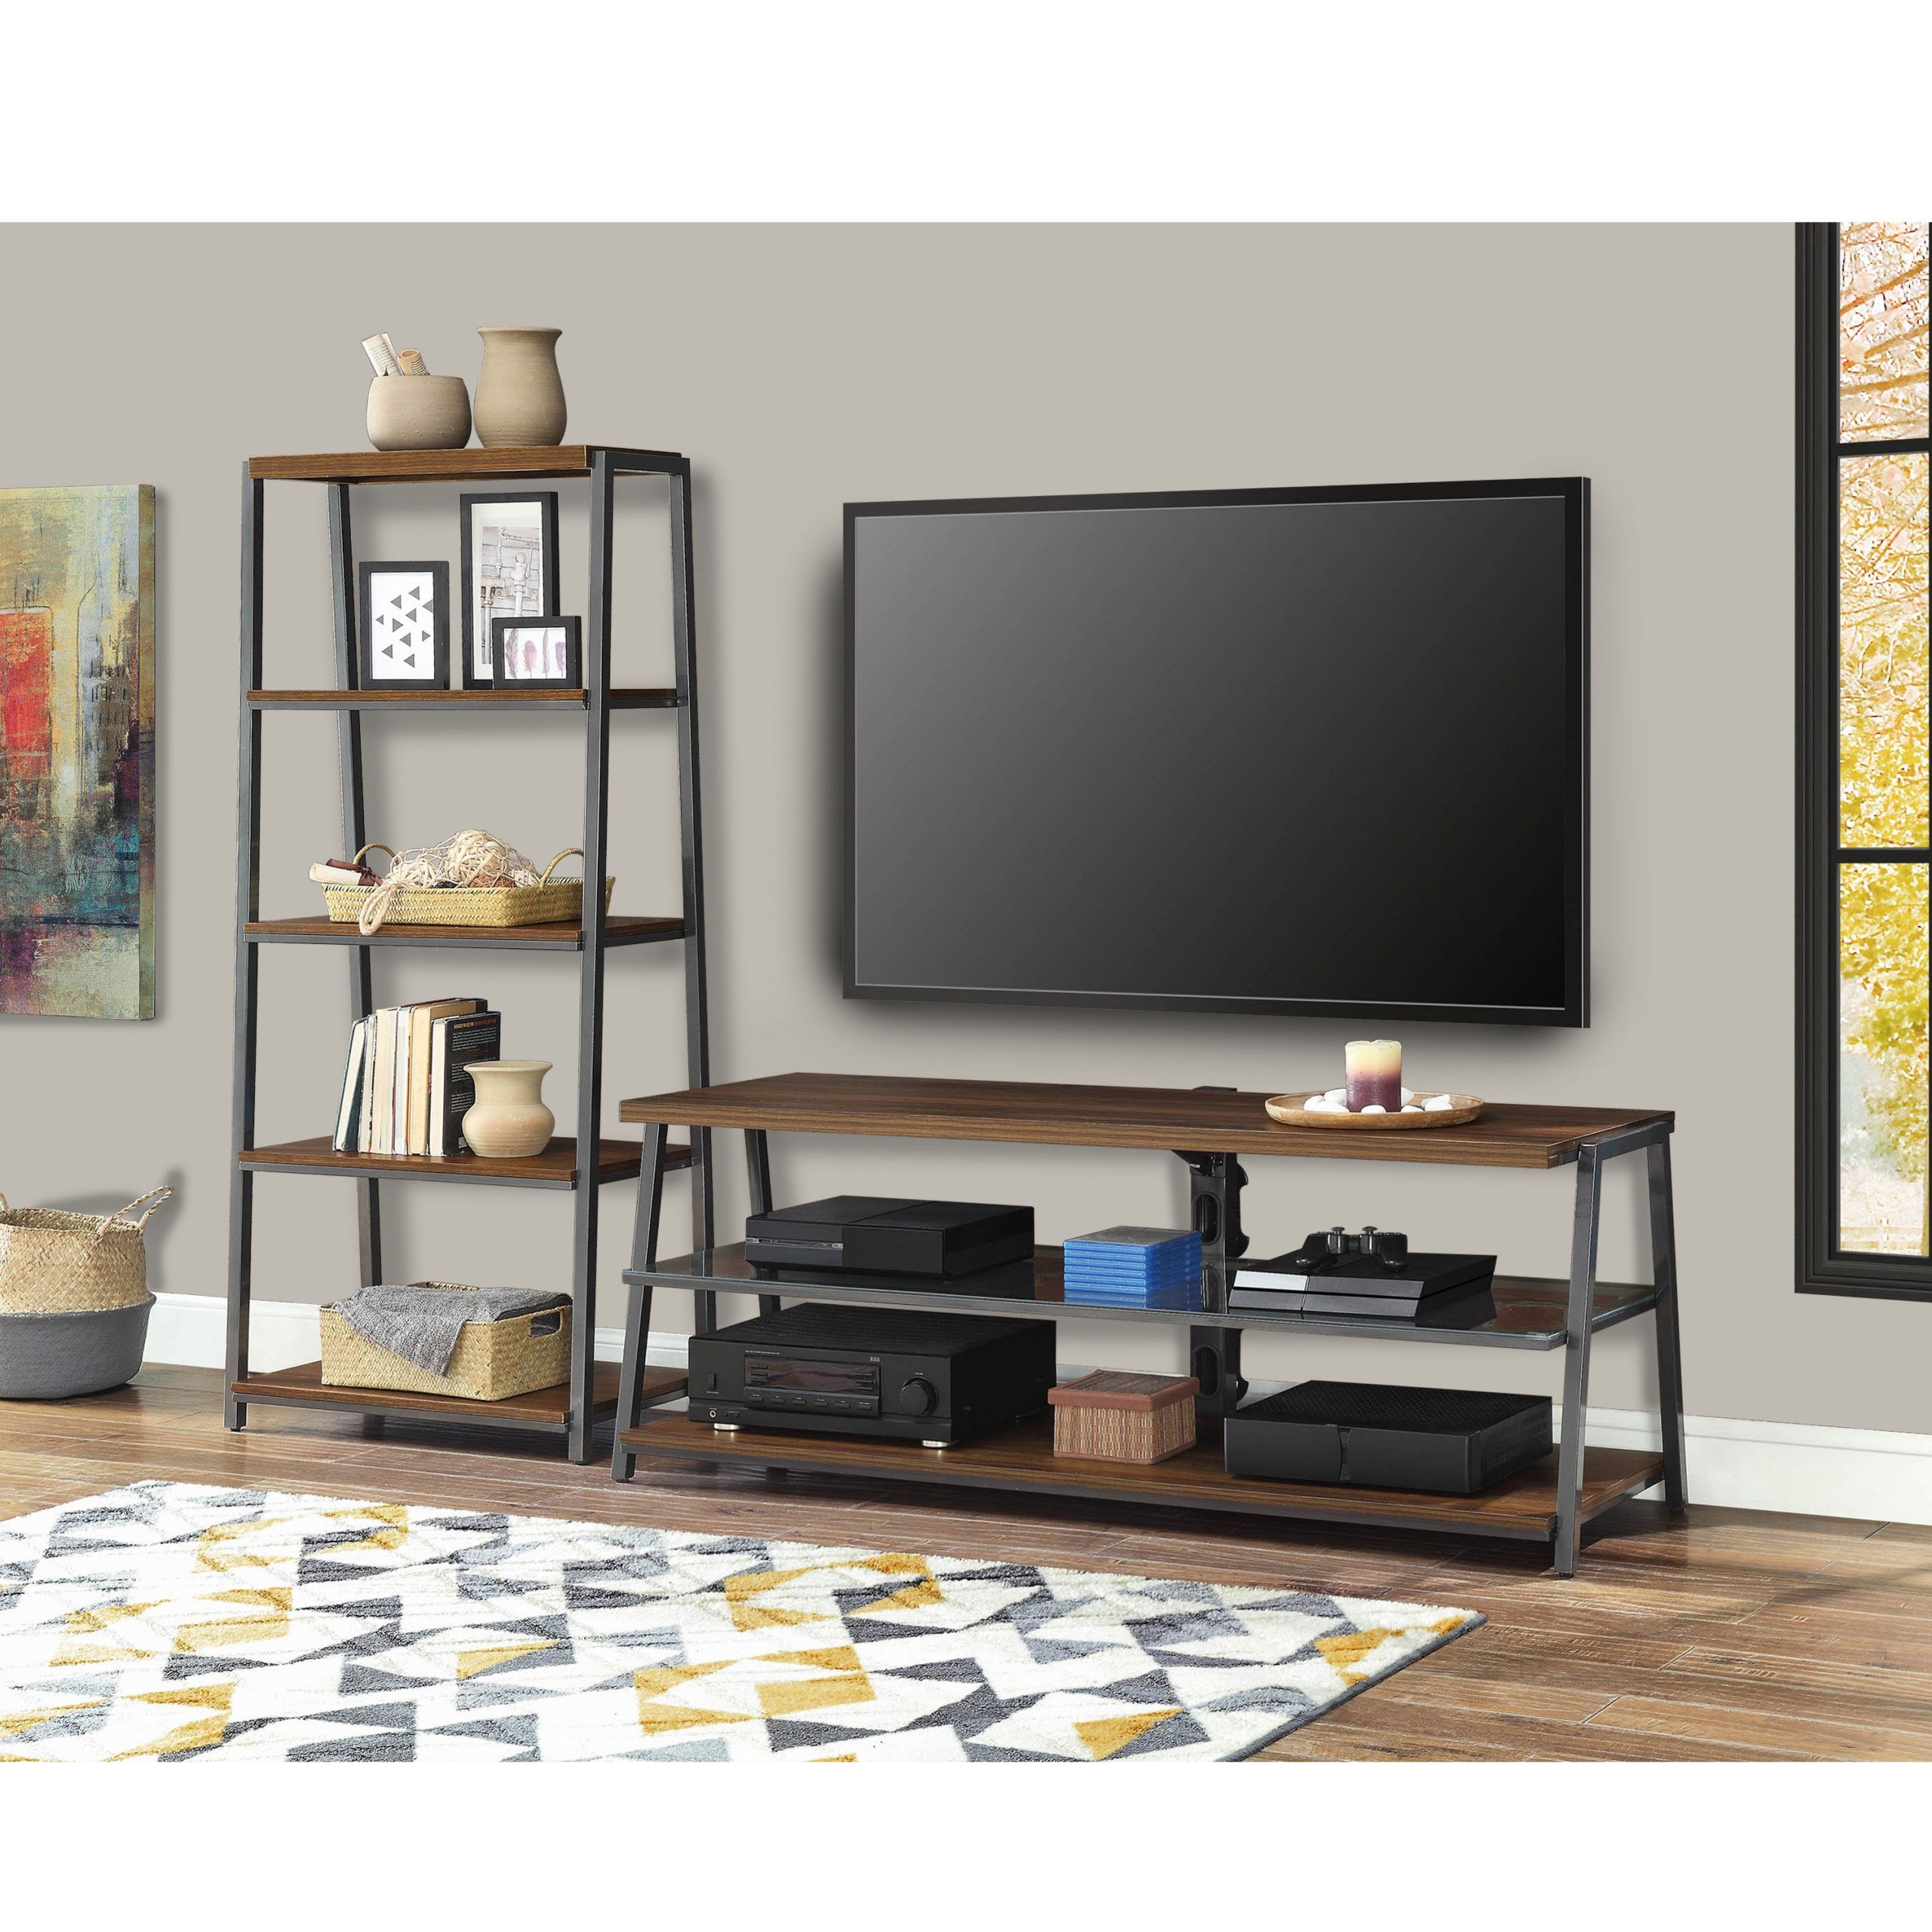 Mainstays Arris Tv Stand For 70" Flat Panel Tvs And 4 Intended For Mainstays Arris 3 In 1 Tv Stands In Canyon Walnut Finish (Gallery 8 of 20)